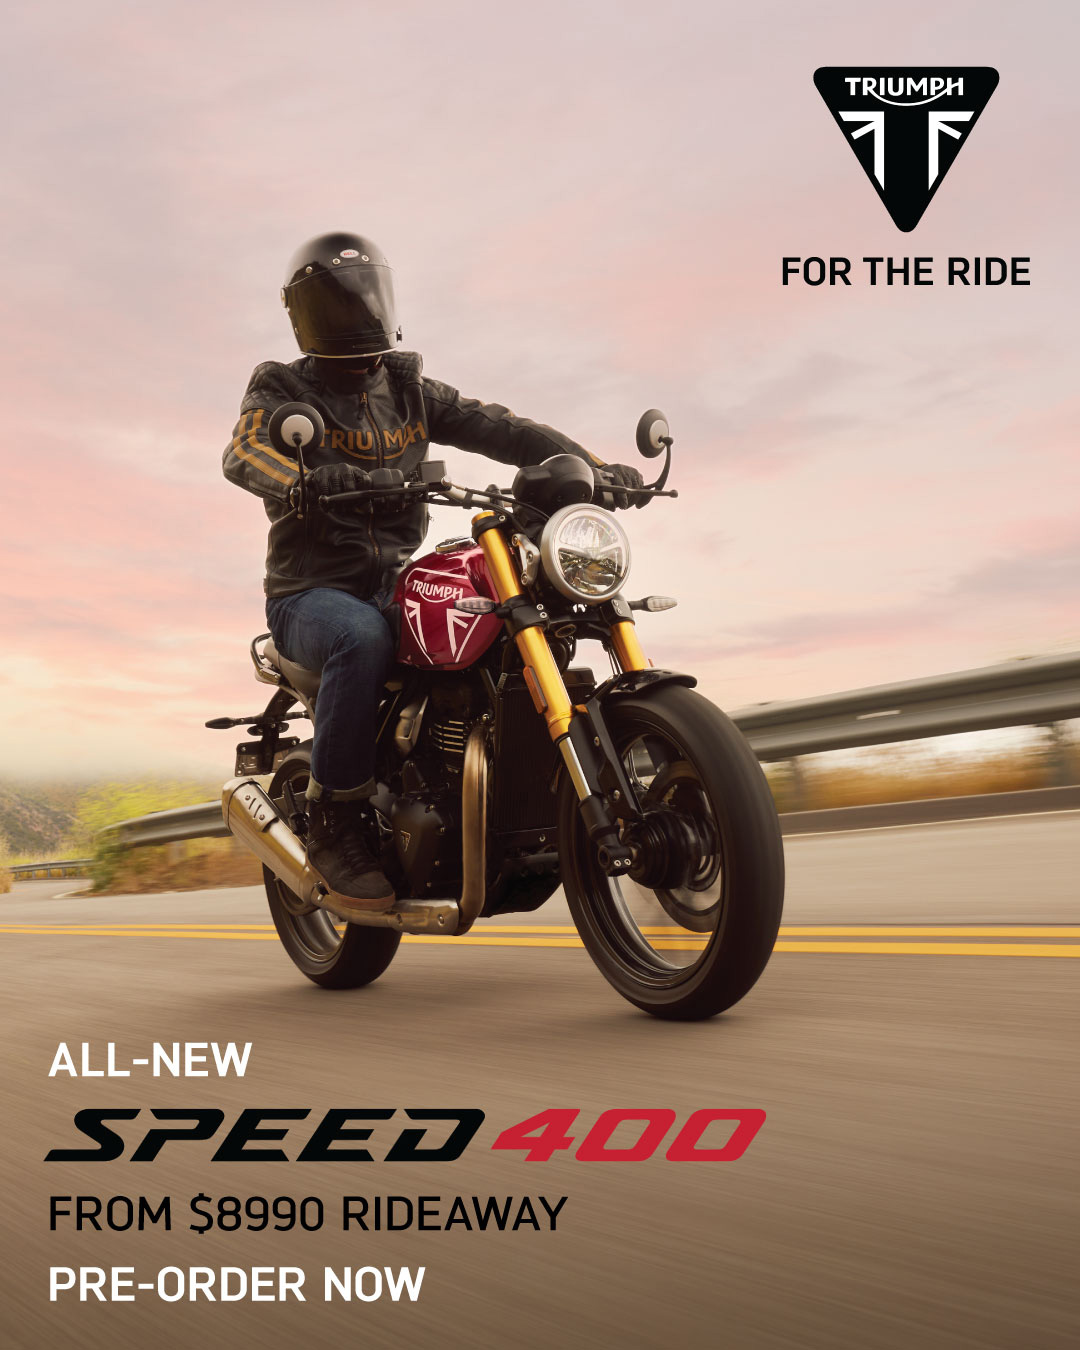 Preorder the new Triumph Speed 400